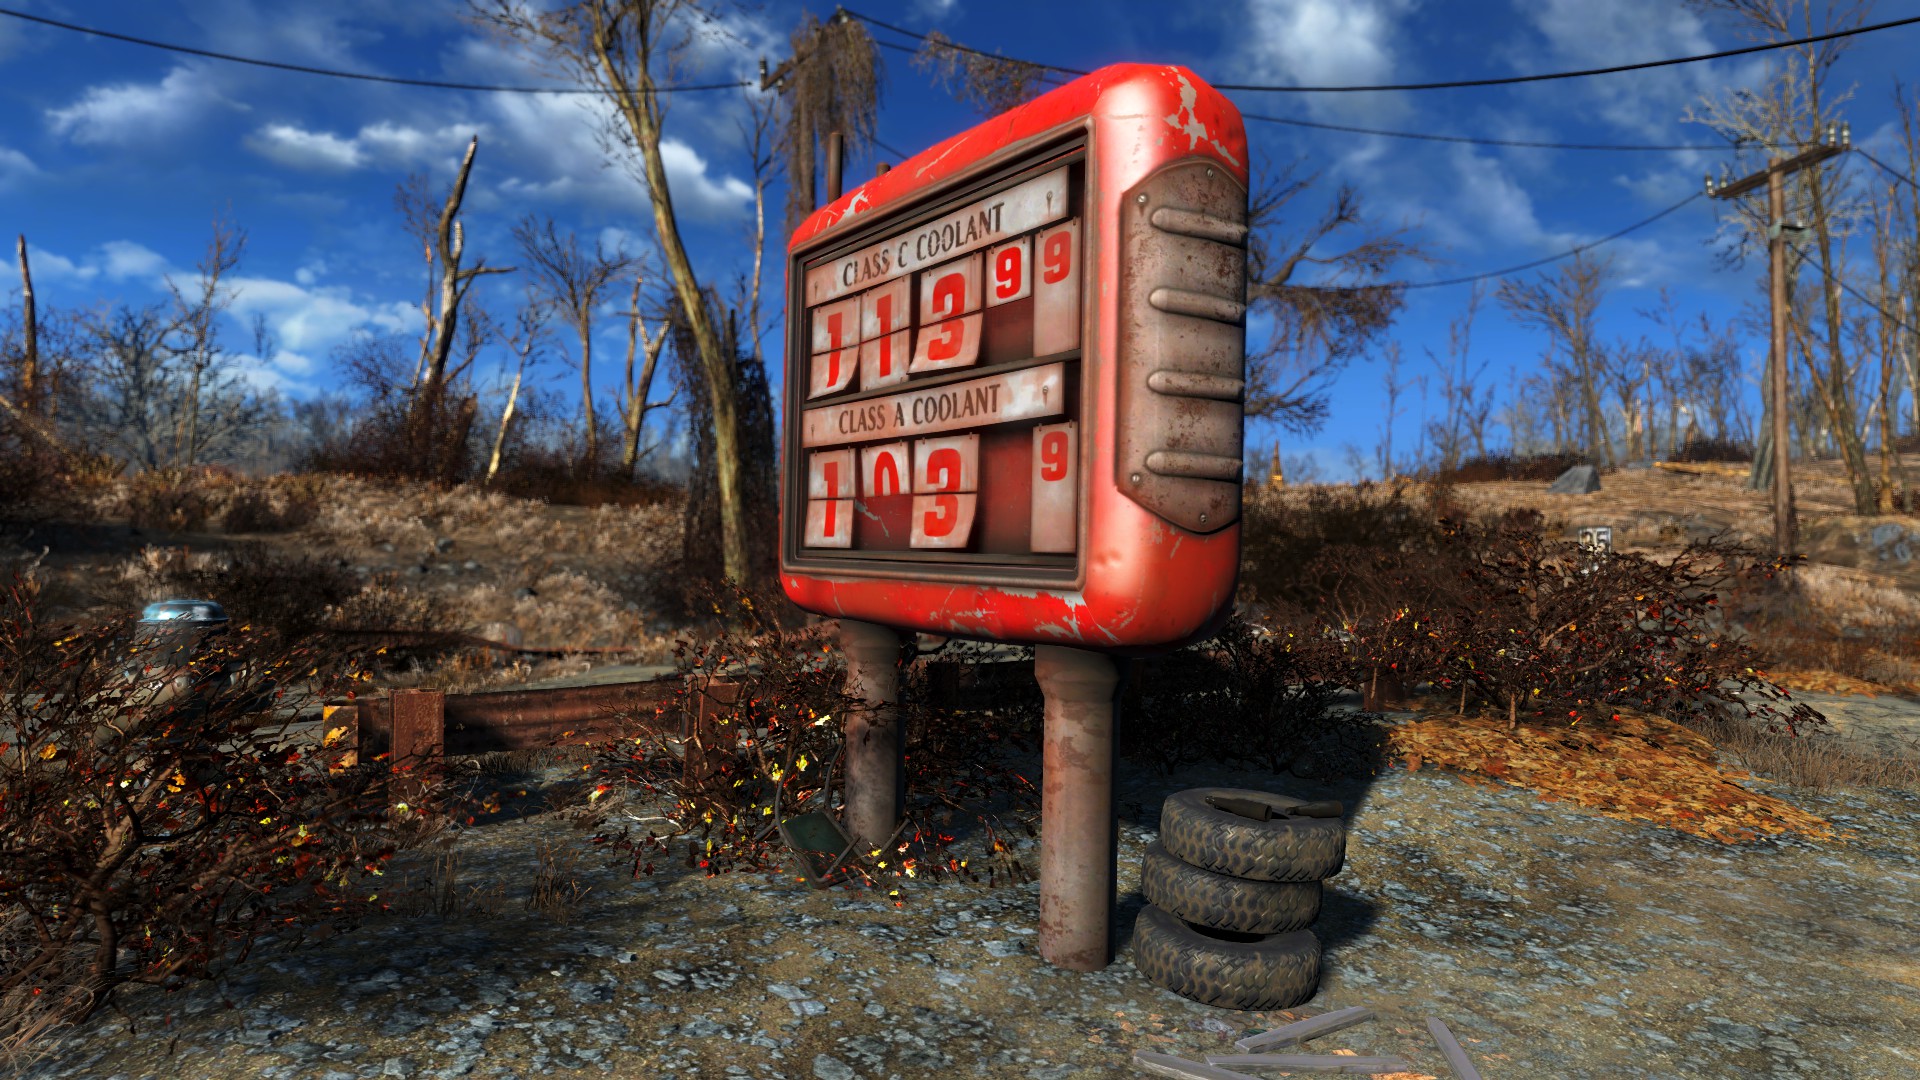 Enbseries fallout 4 download фото 15